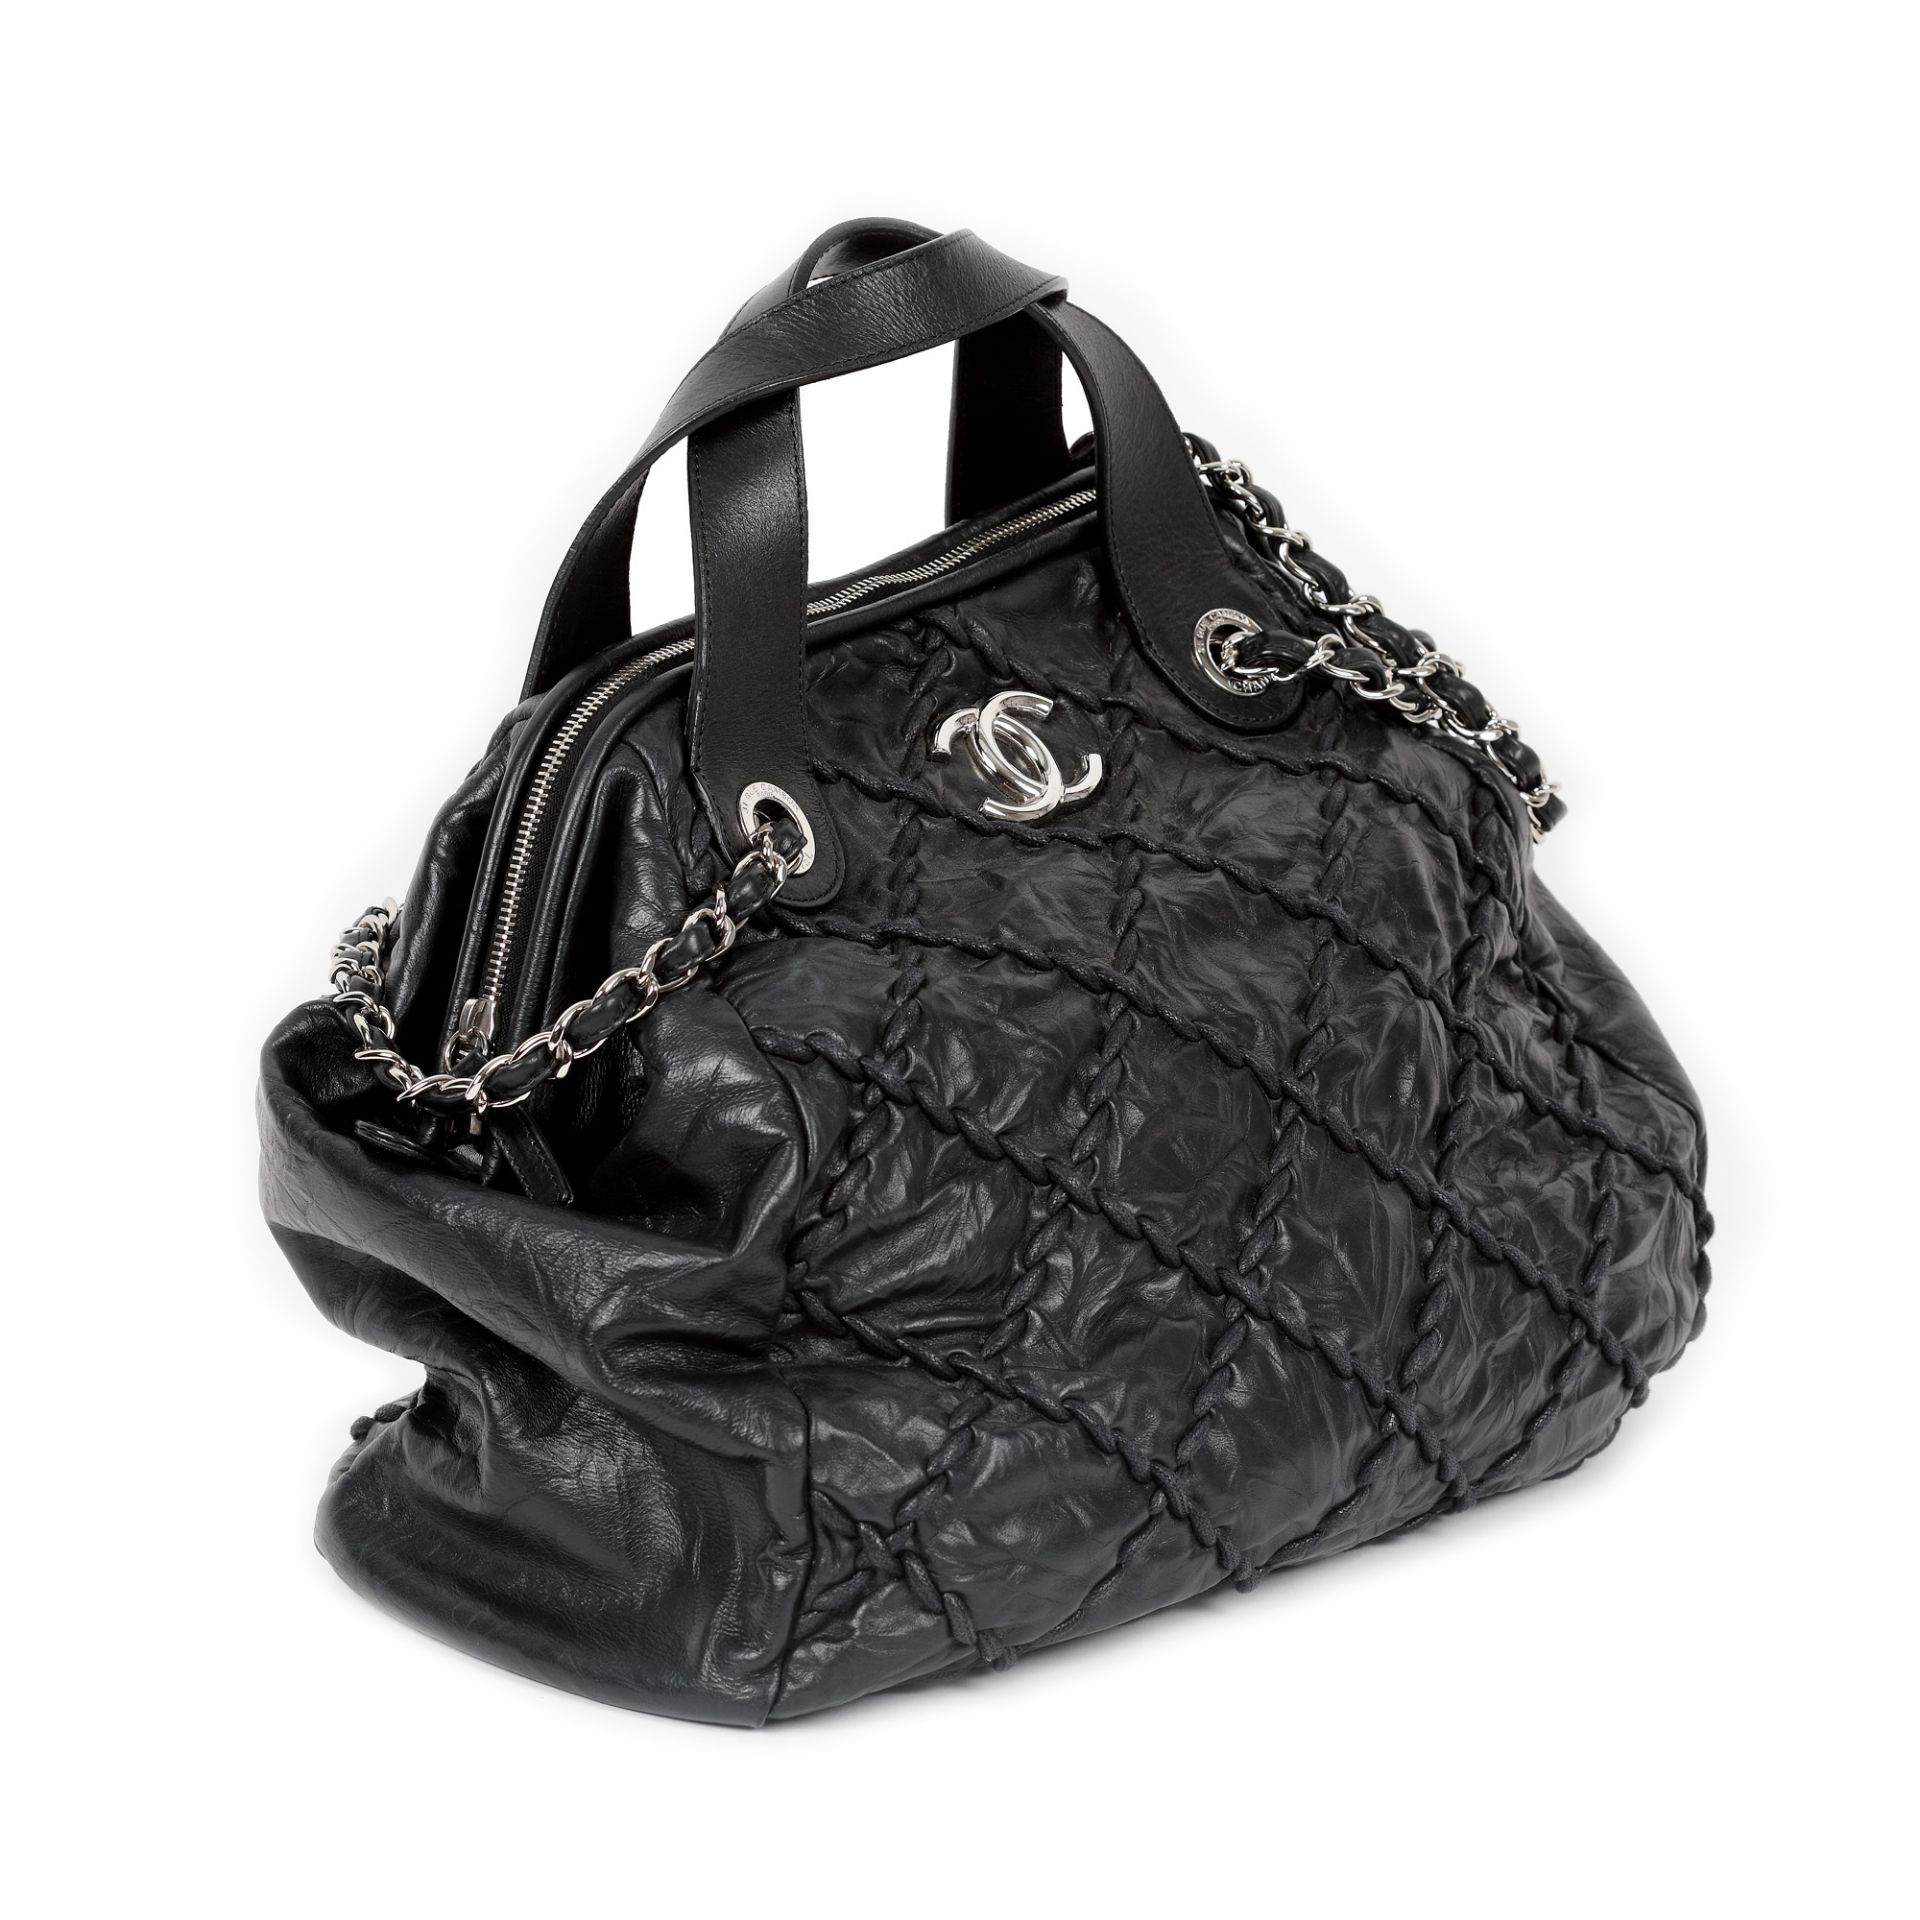 "Ultra Stitch Bowling Bag", Chanel bag, quilted leather, black, authenticity card and original cover - Image 2 of 4